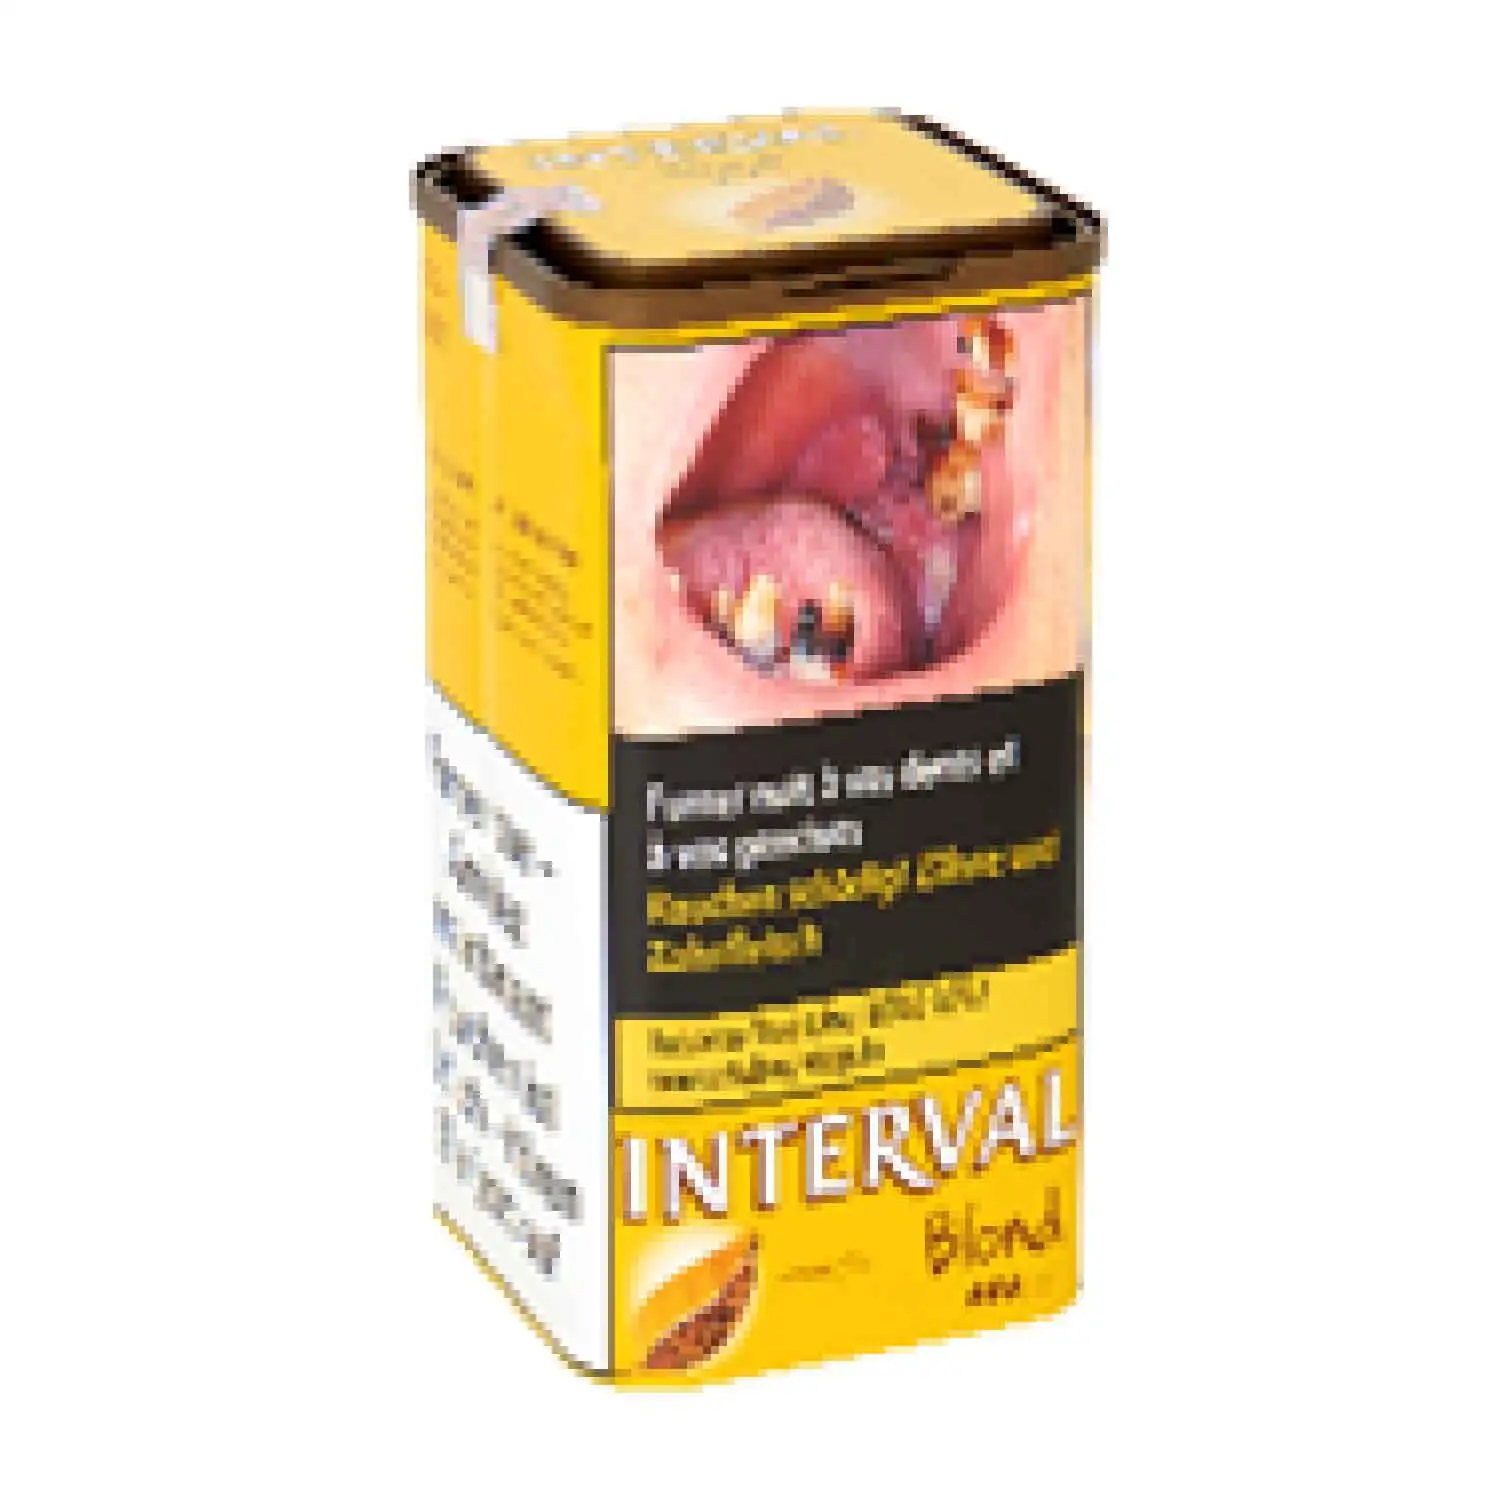 Interval blond 250g - Buy at Real Tobacco